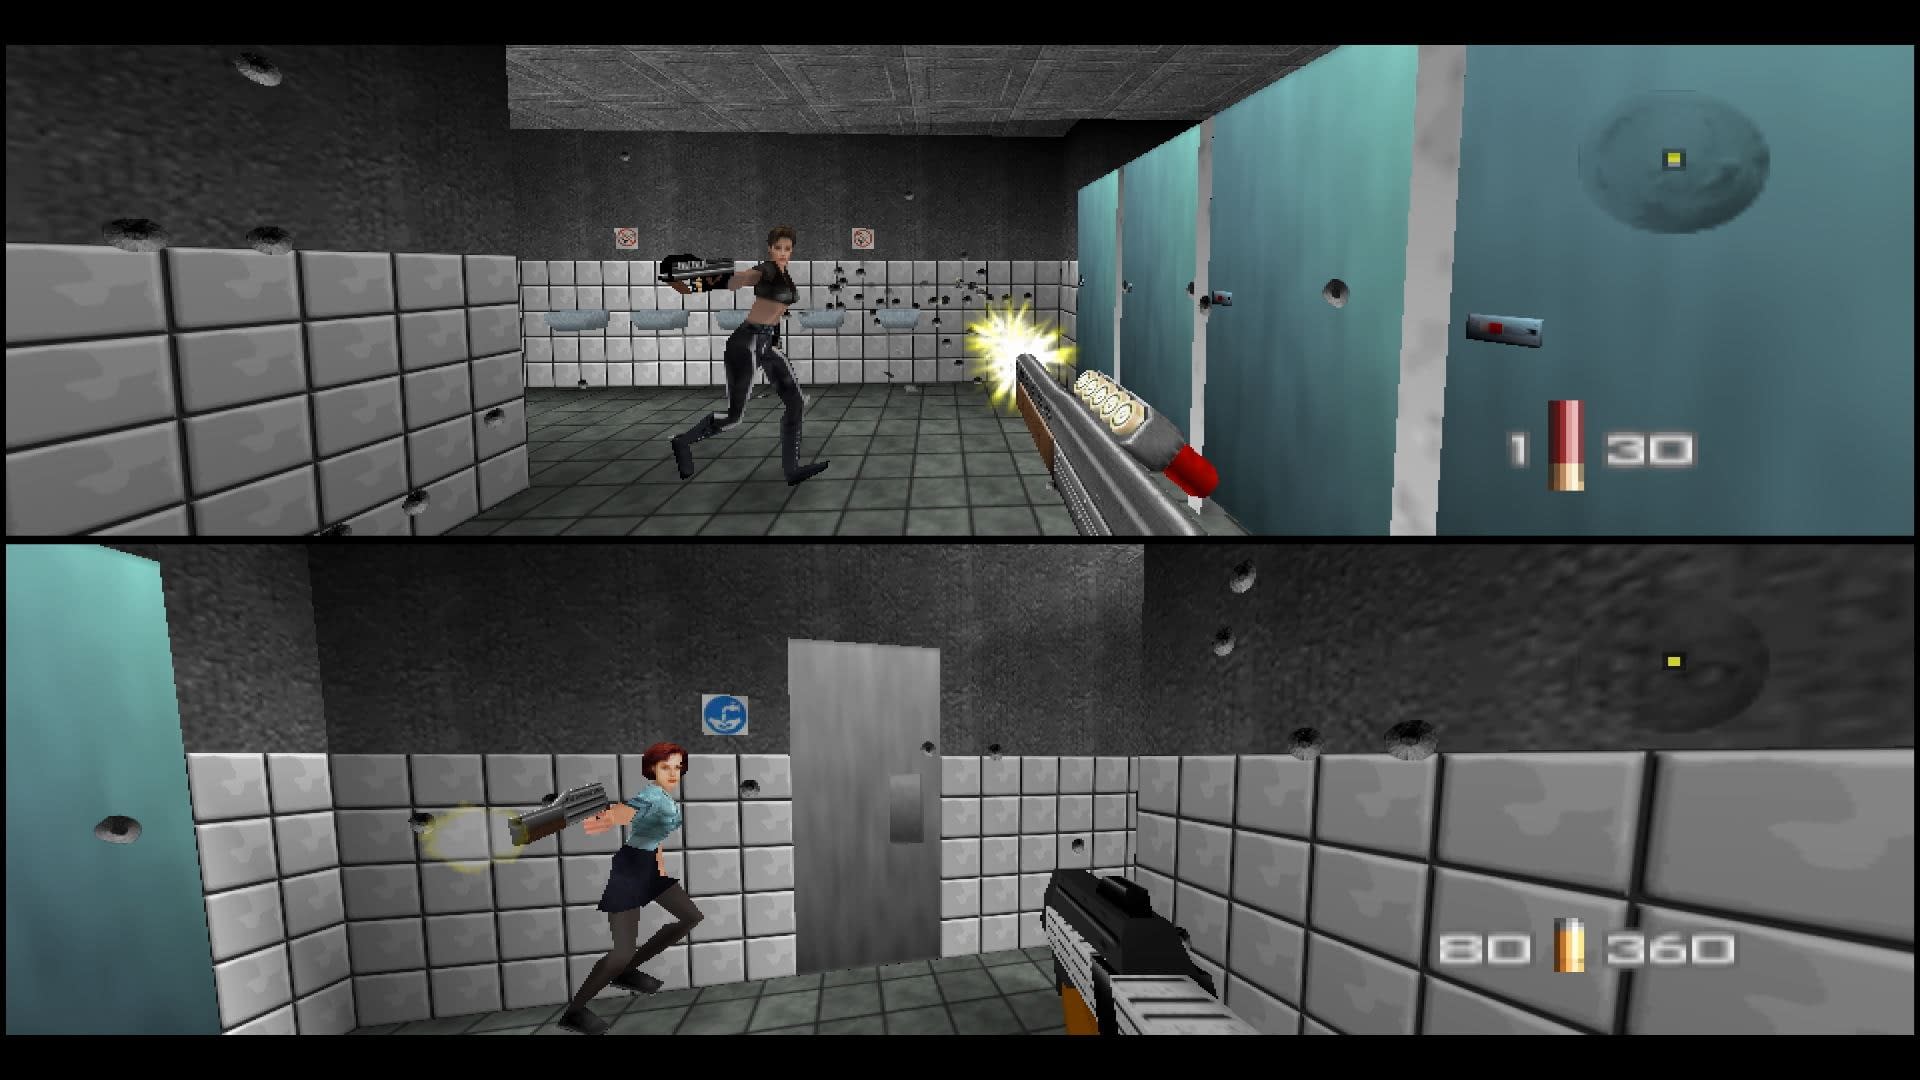 GoldenEye 007 Comes To Nintendo Switch This Friday